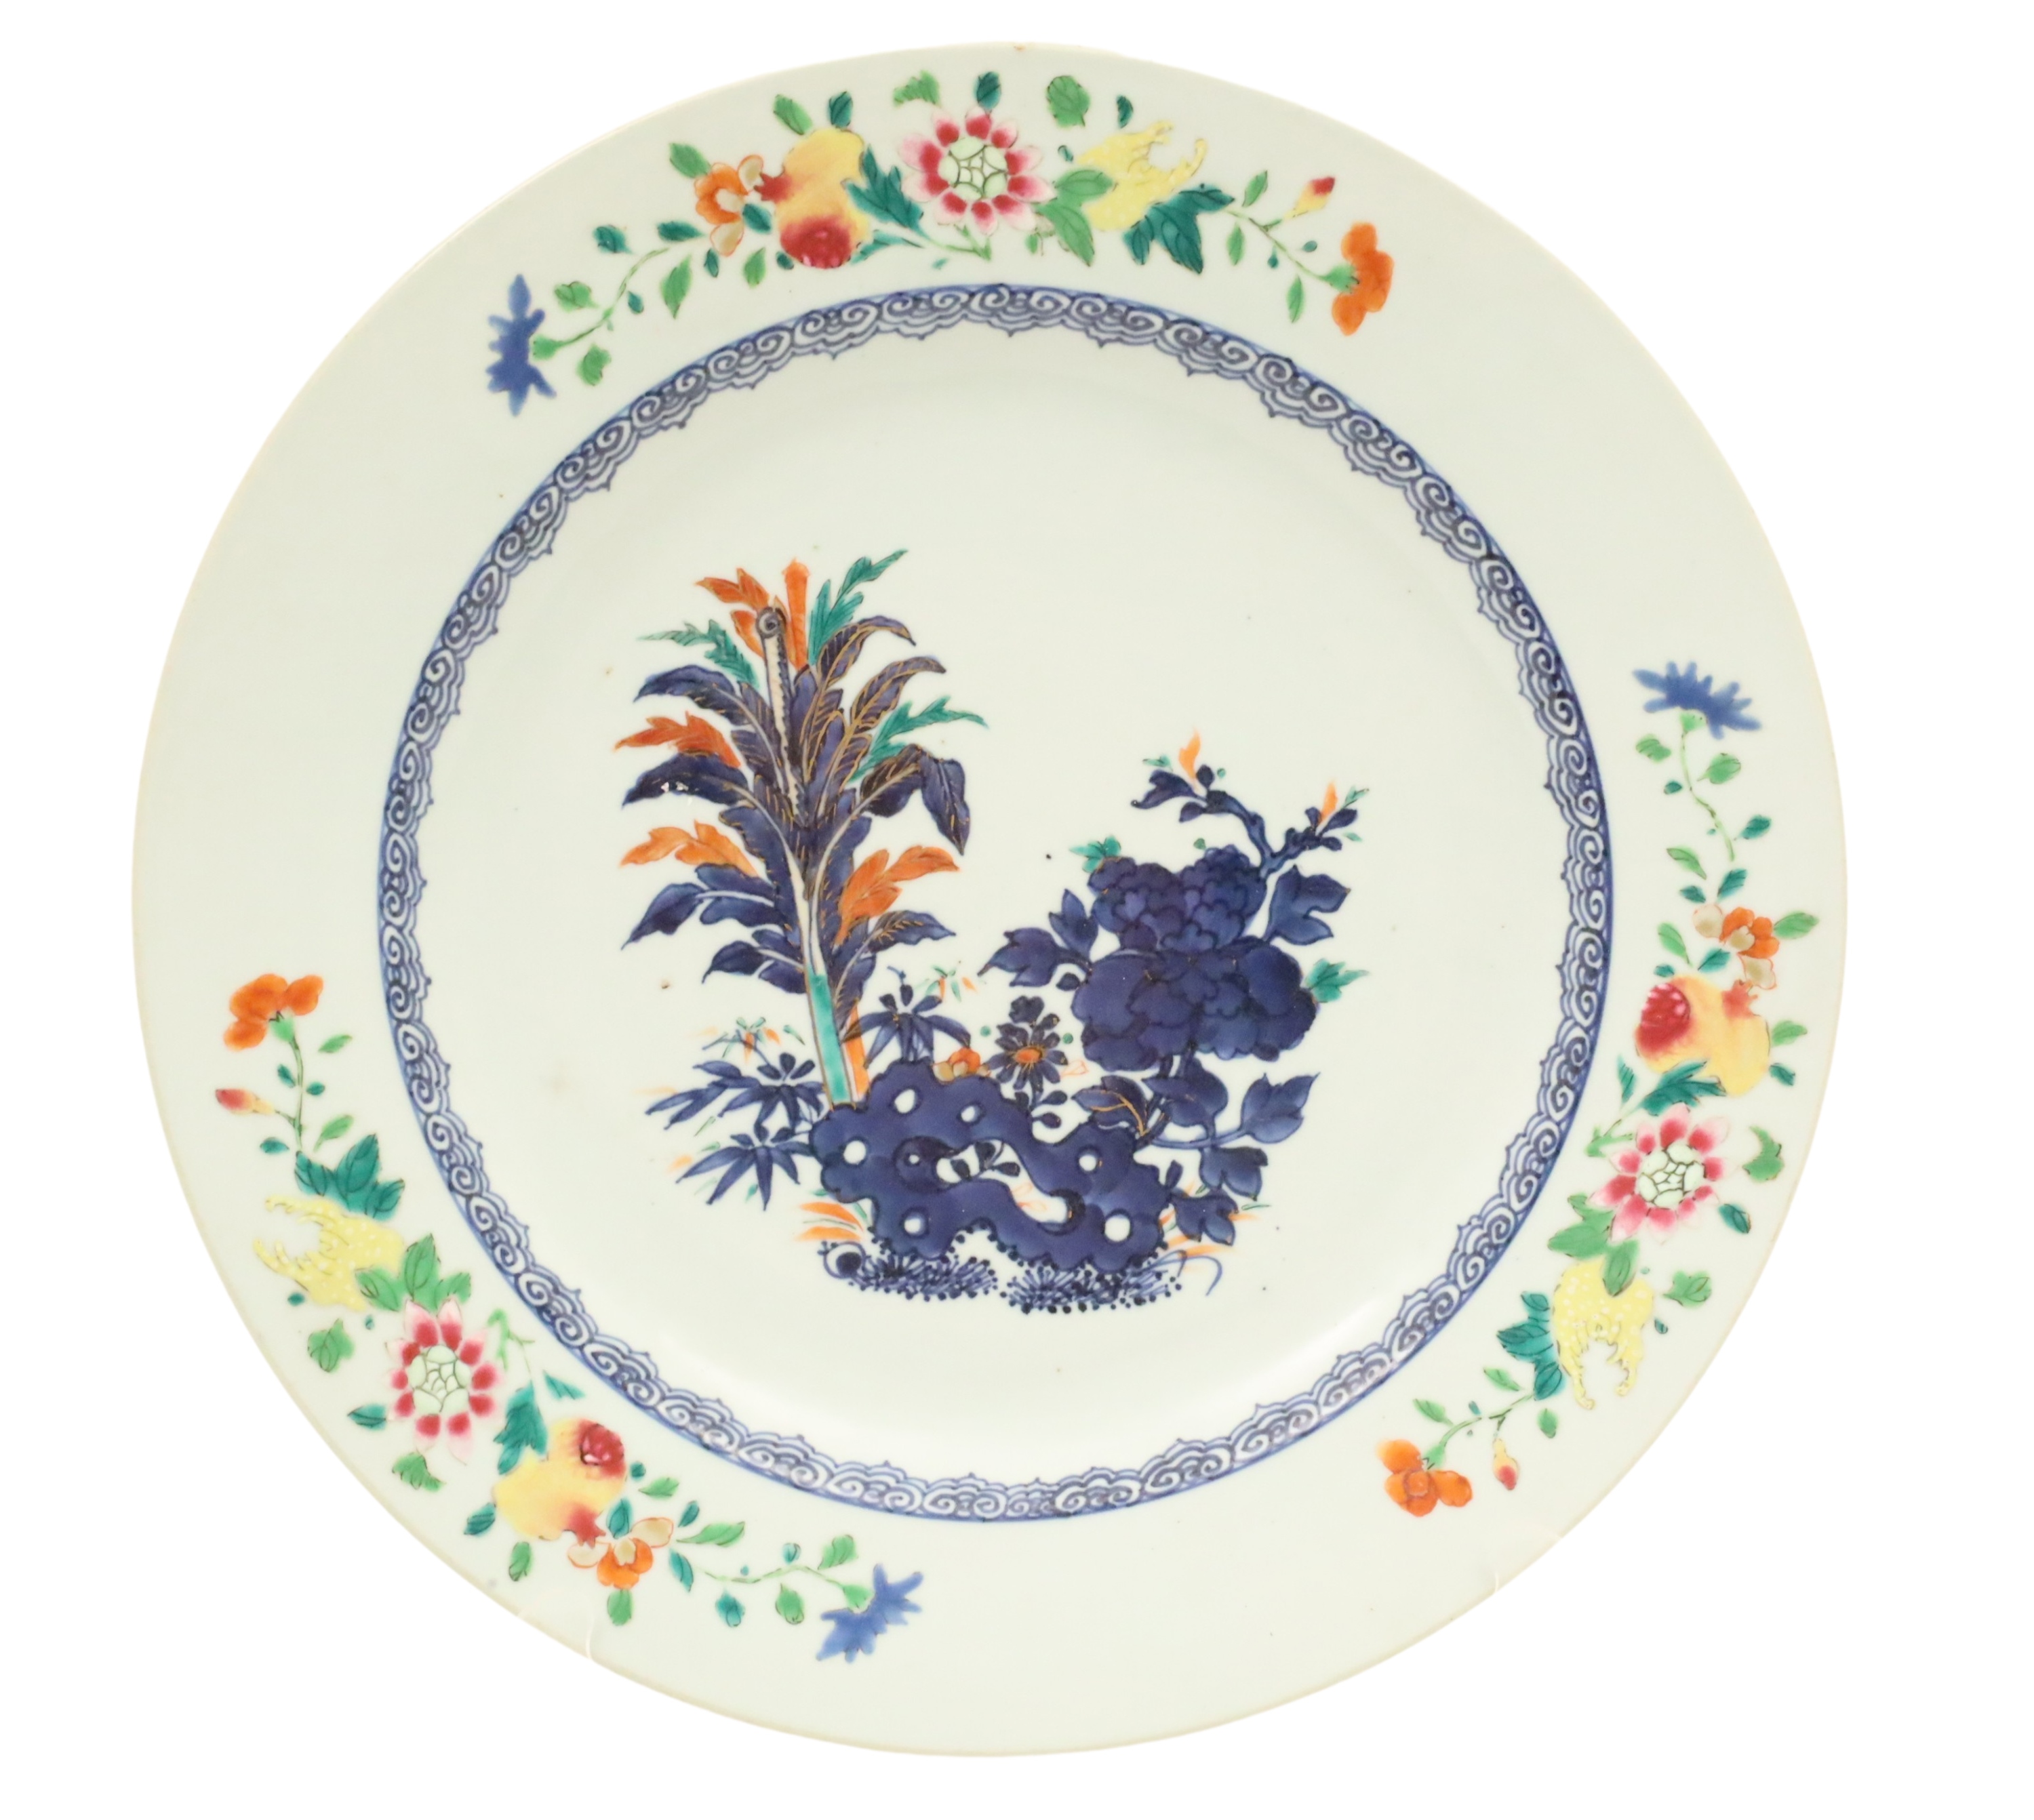 CHINESE EXPORT PORCELAIN CHARGER 2f8e62